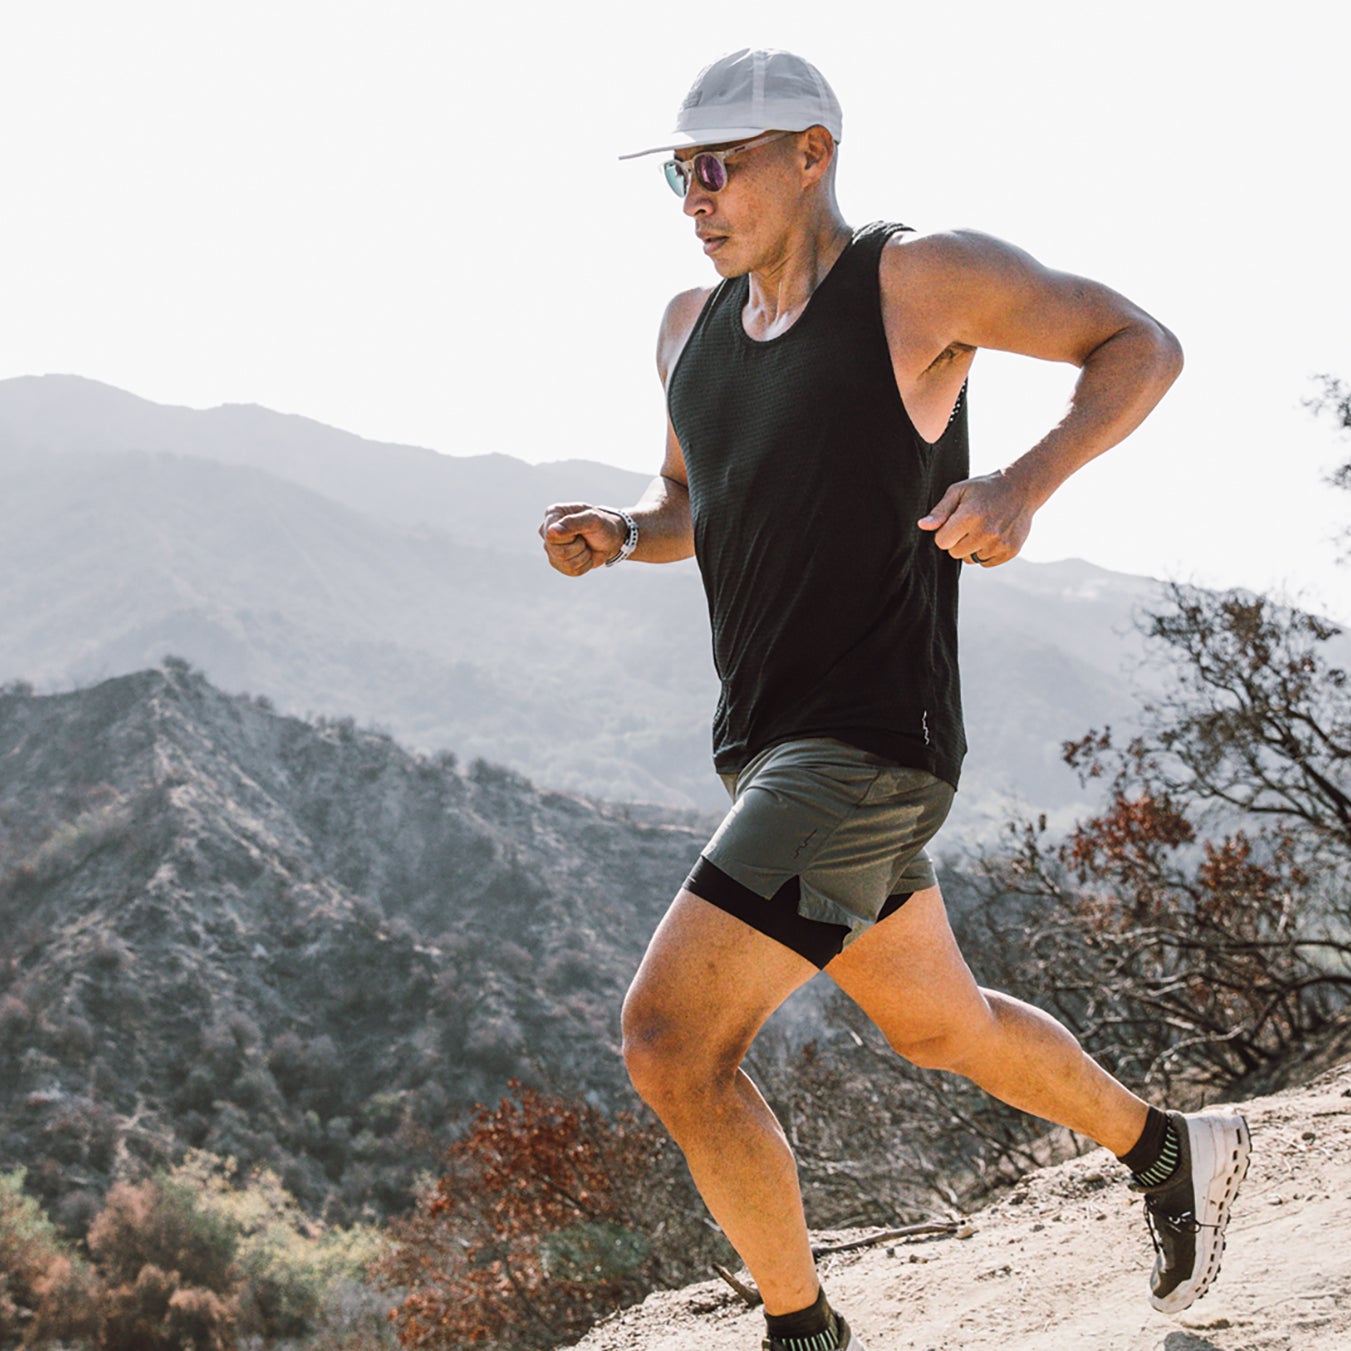 The 10 Best Values in Running Apparel